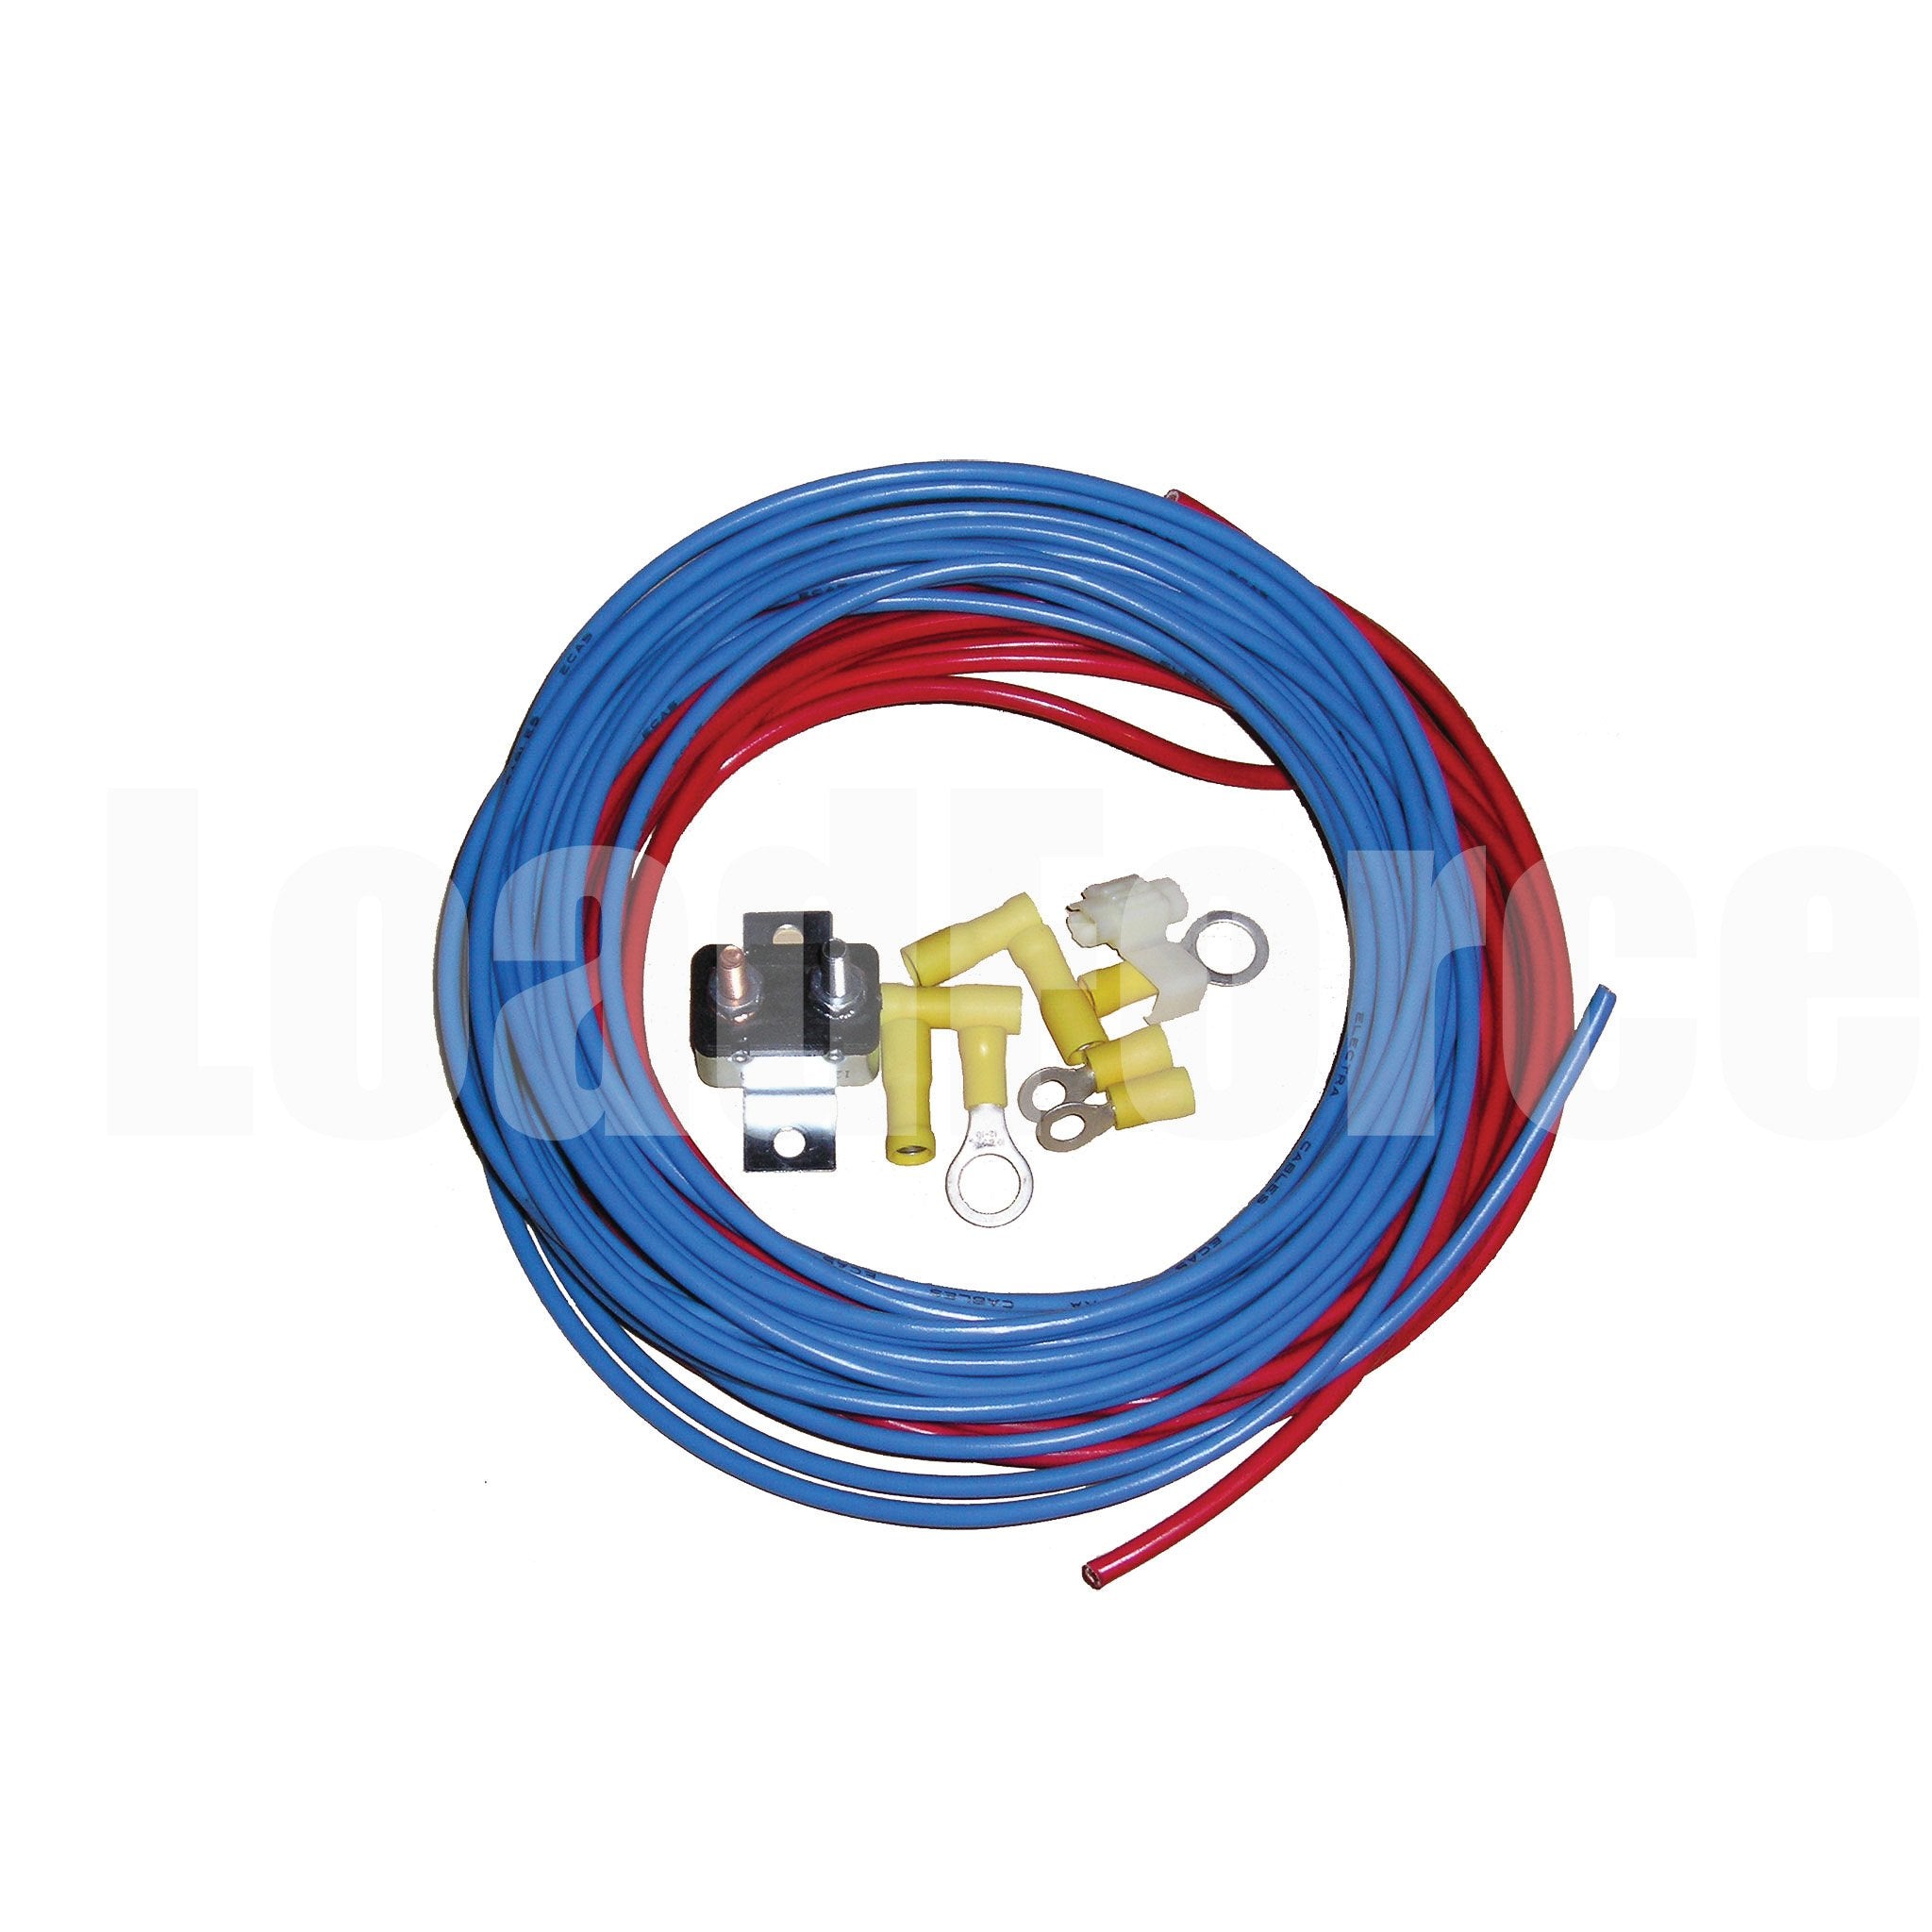 LoadForce Vehicle Brake Controller and Charge Wire Kit.